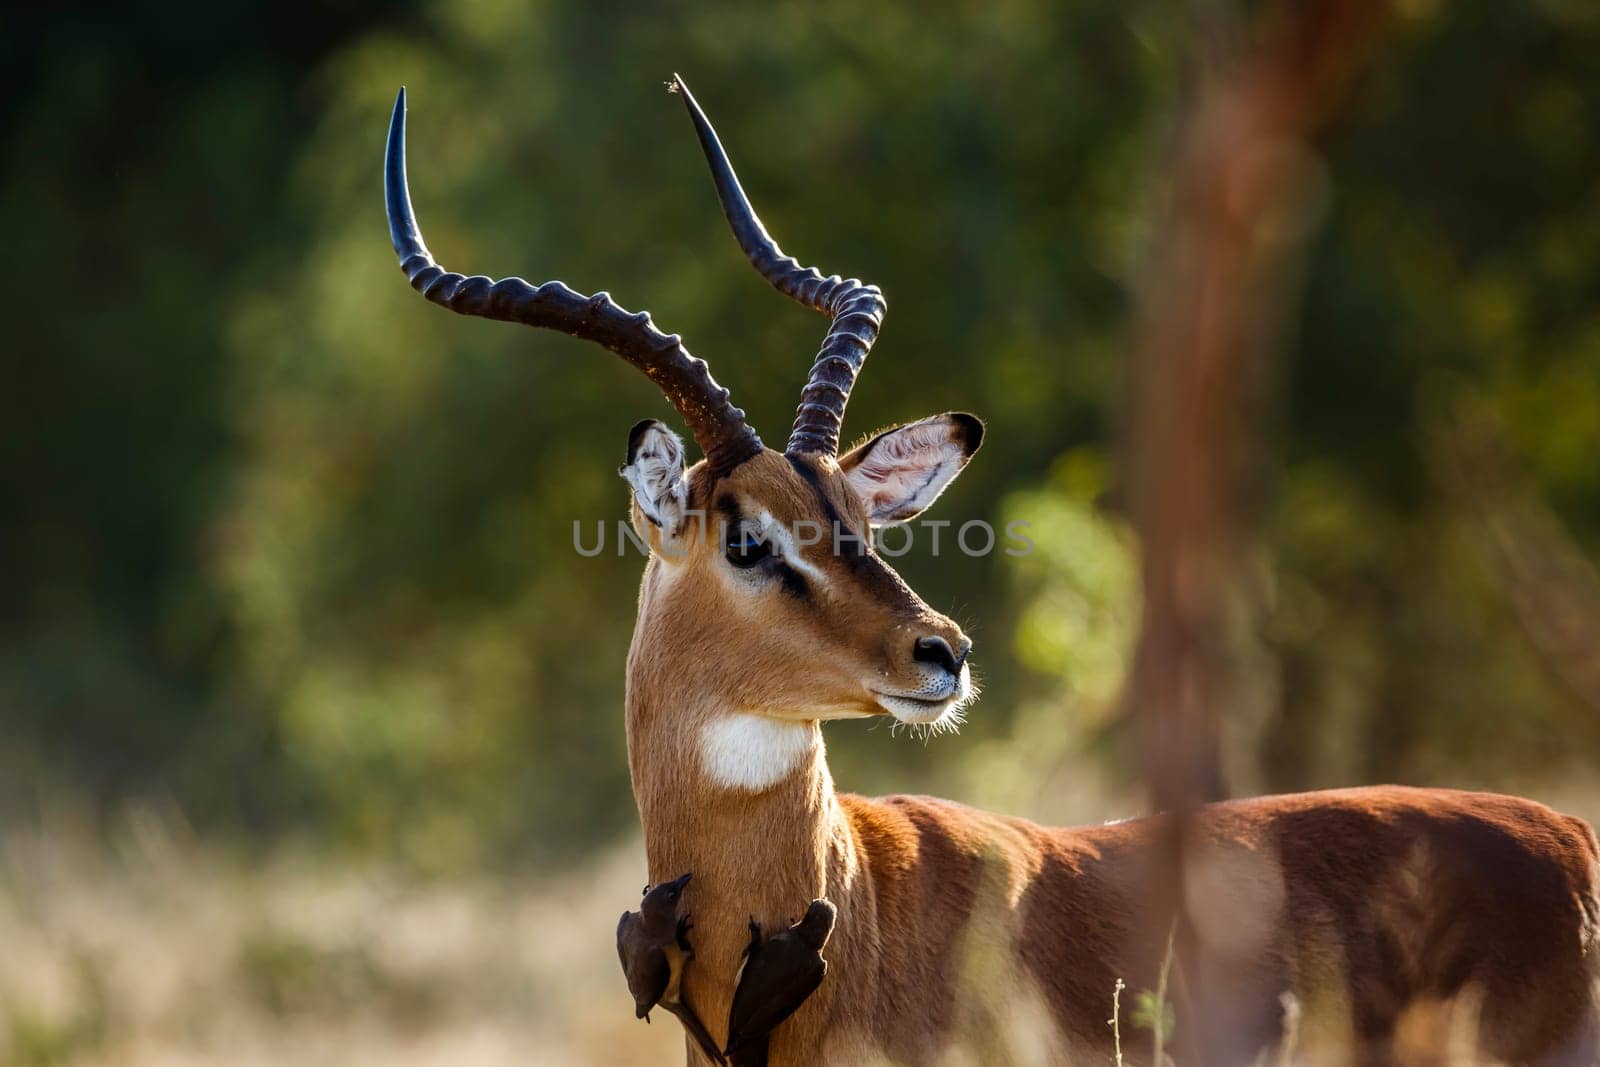 Common Impala male portrait with oxpecker in Kruger National park, South Africa ; Specie Aepyceros melampus family of Bovidae